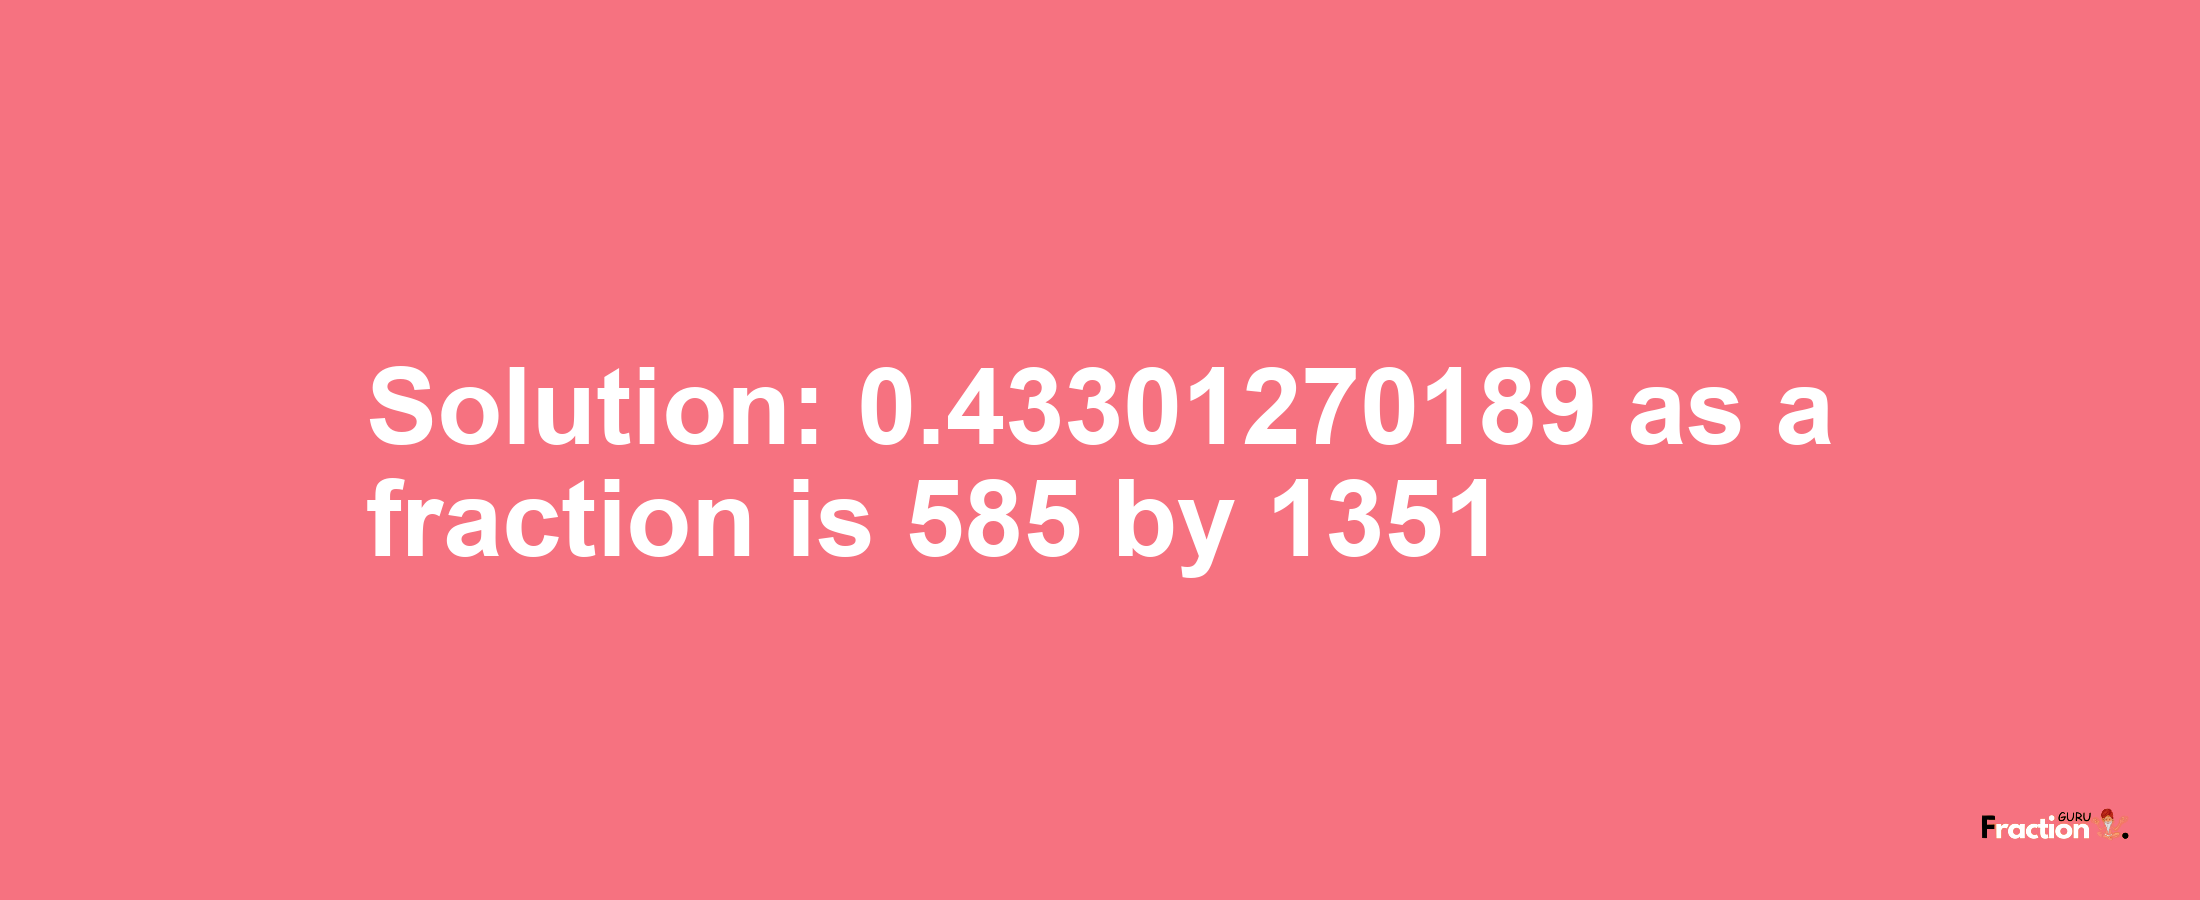 Solution:0.43301270189 as a fraction is 585/1351